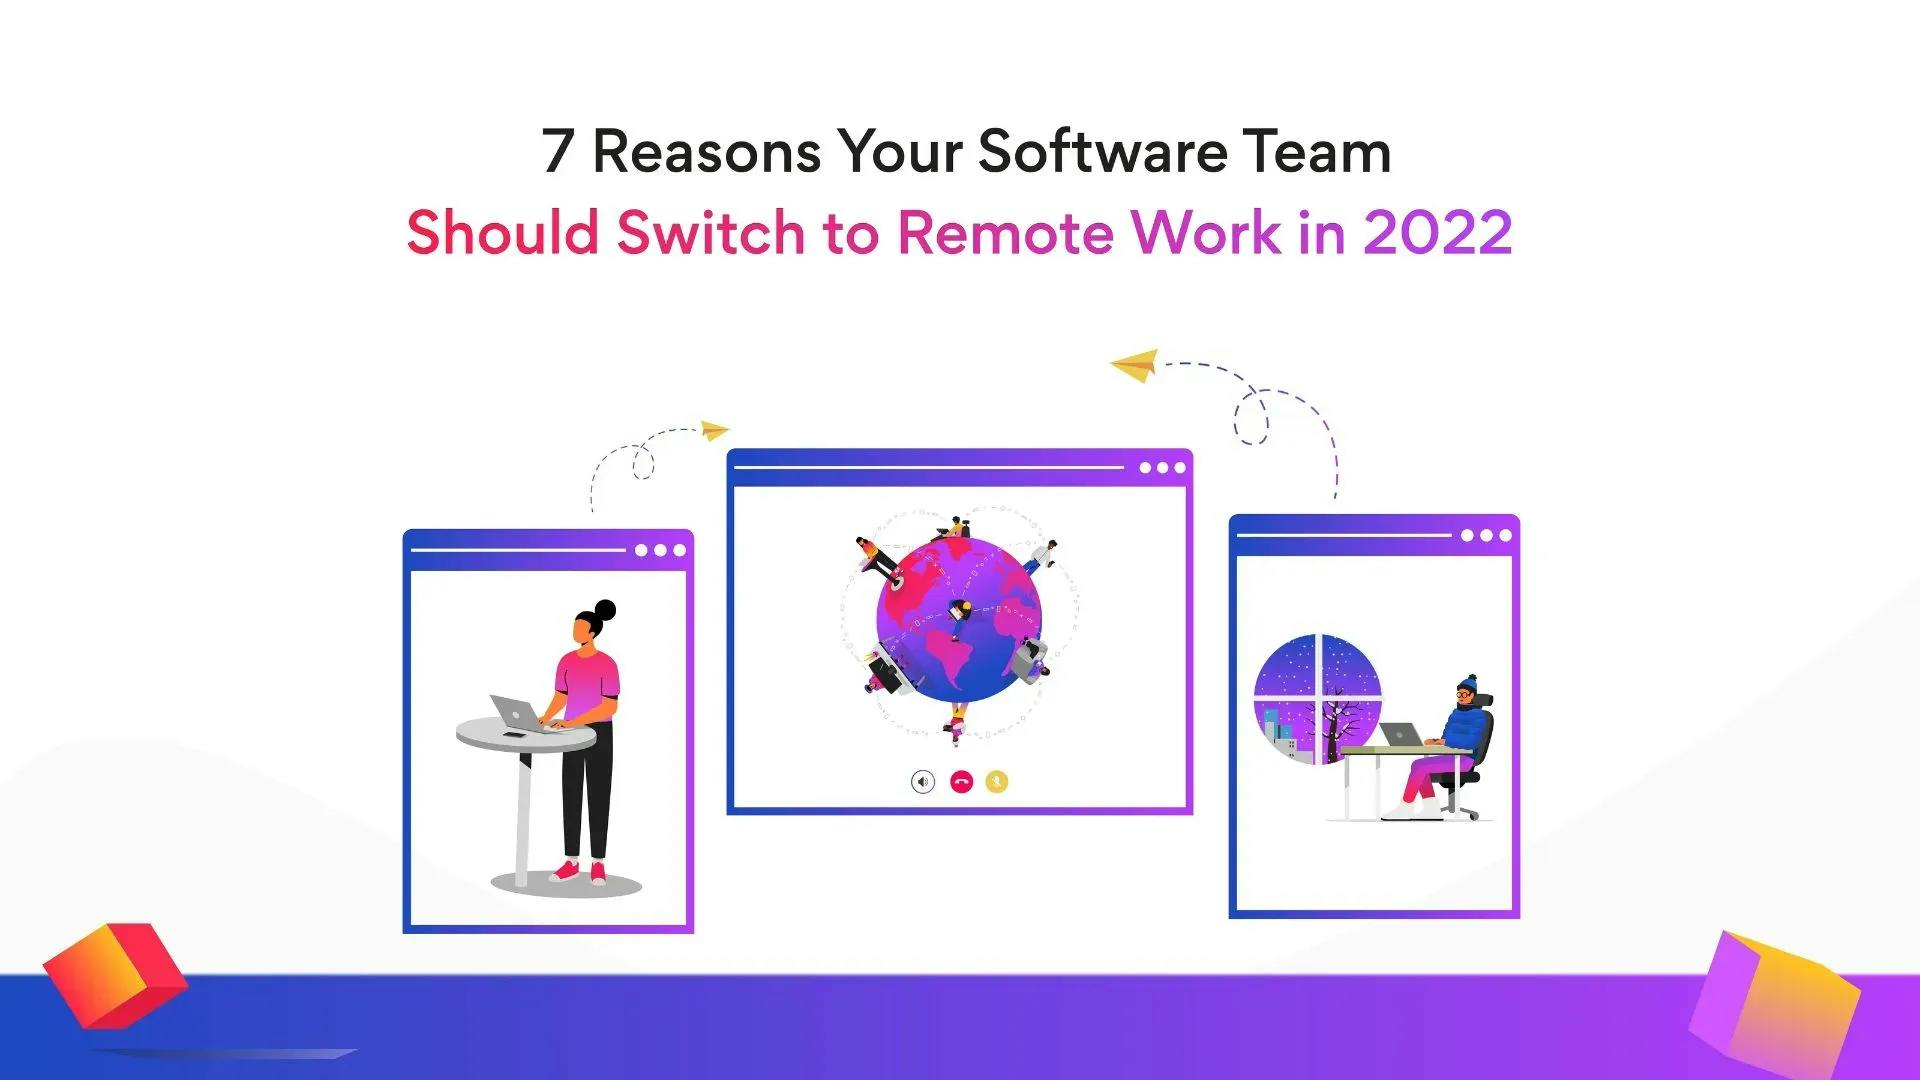 7 Reasons Your Software Team Should Switch to Remote Work